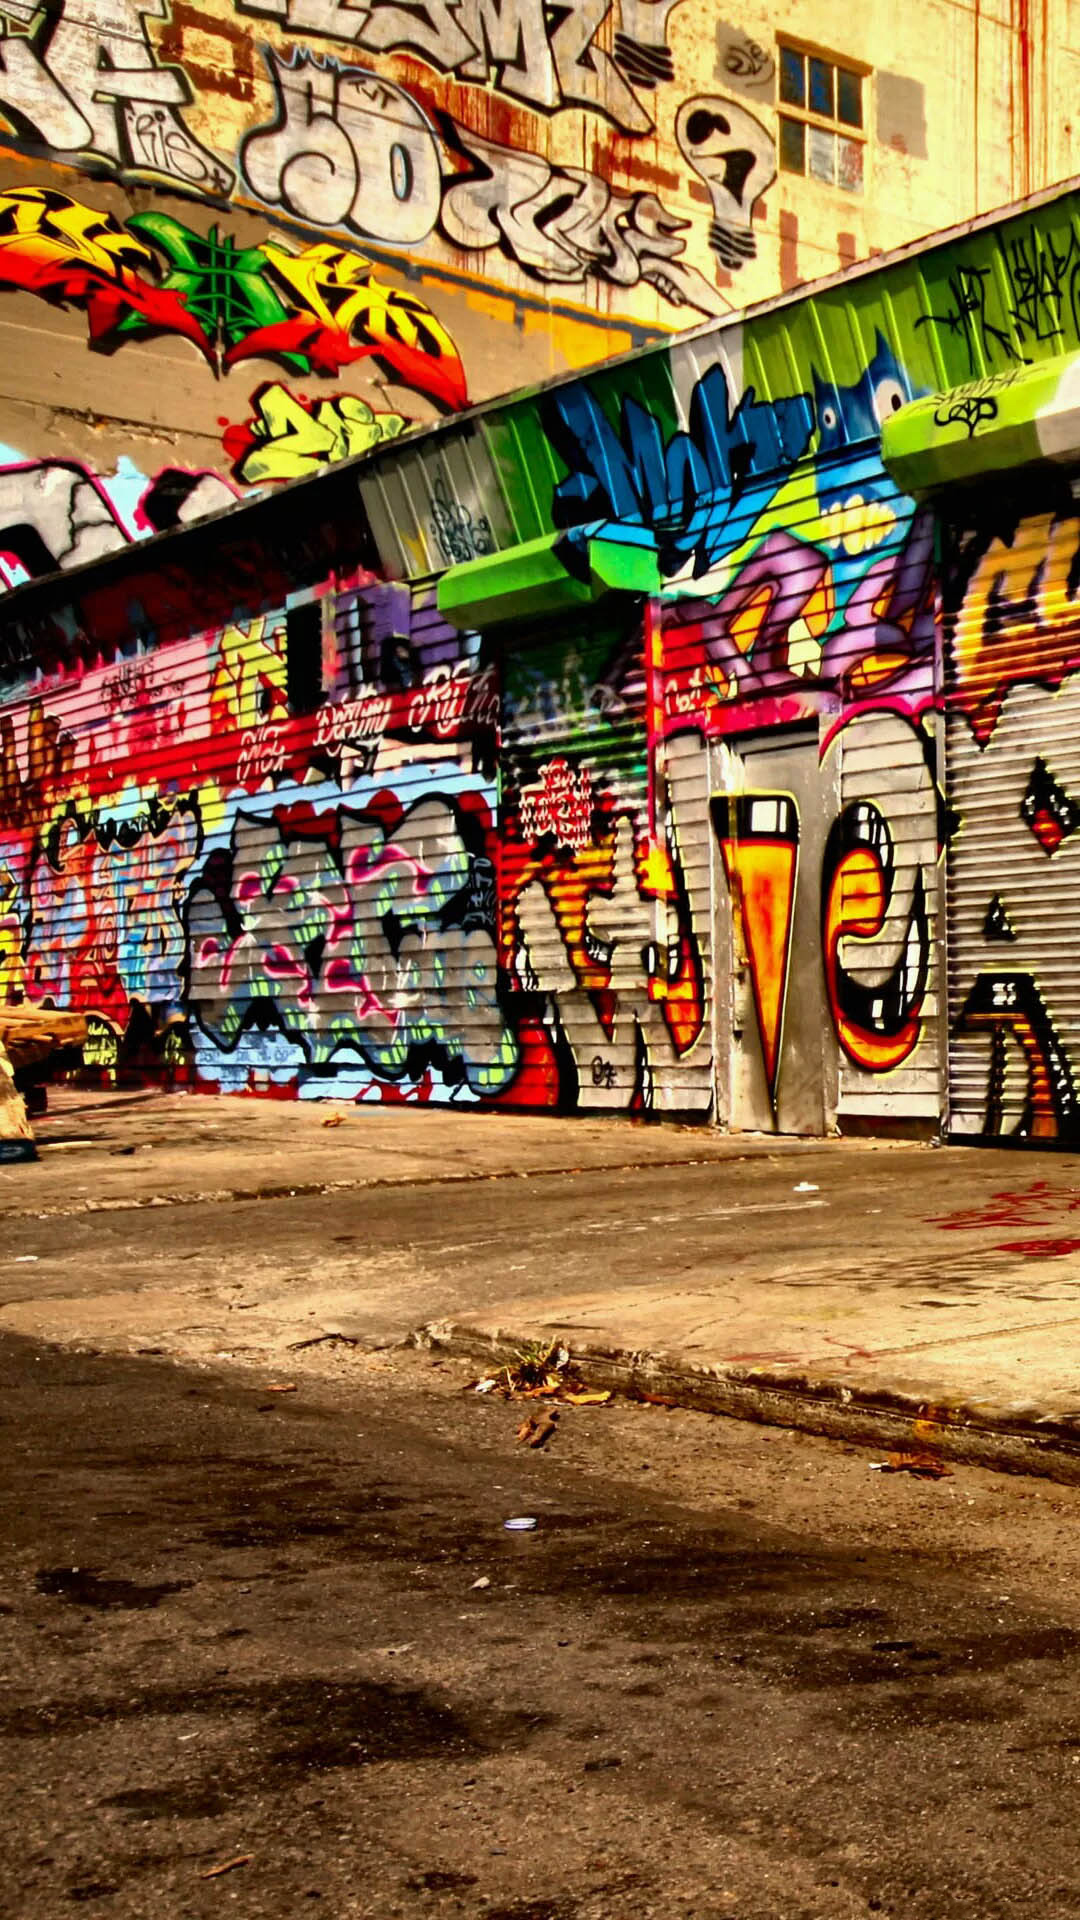 Colorful Graffiti City Alley Street Art Android Wallpaper free download